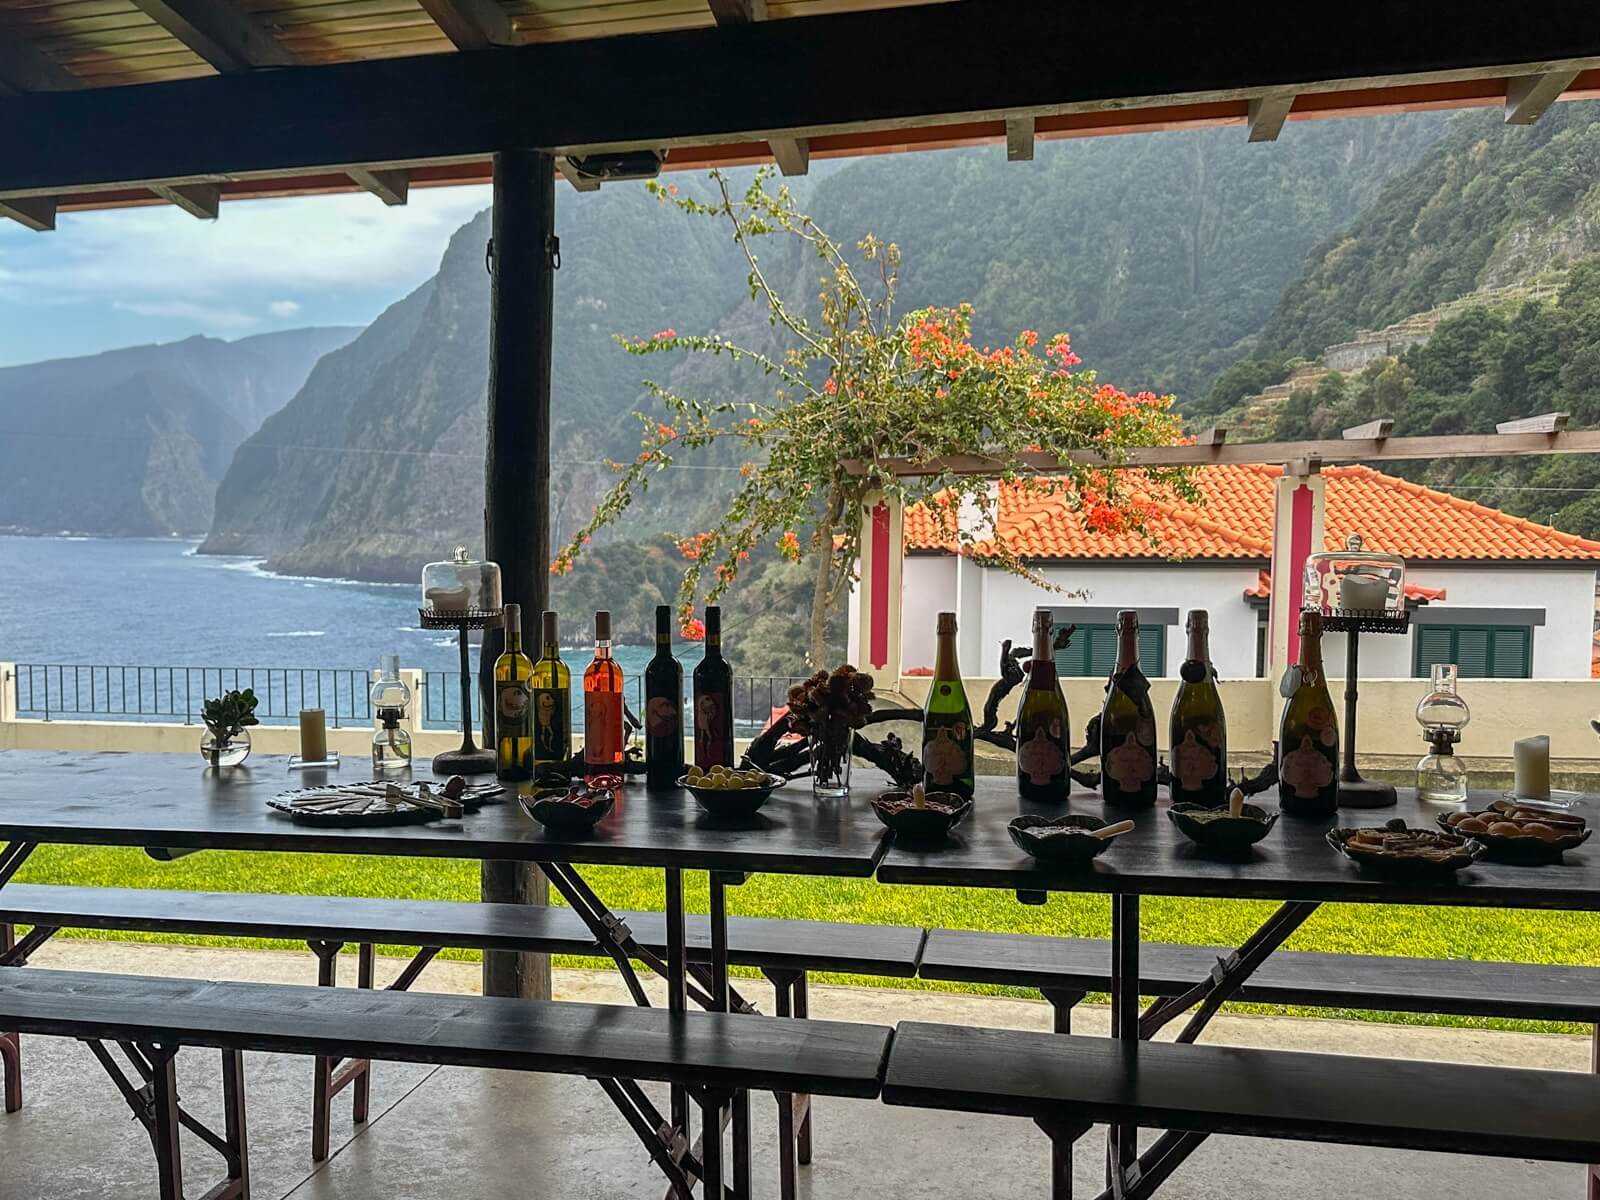 The True Flavours & Natural Beauty of Madeira Islands - Terras do Avo wine tasting